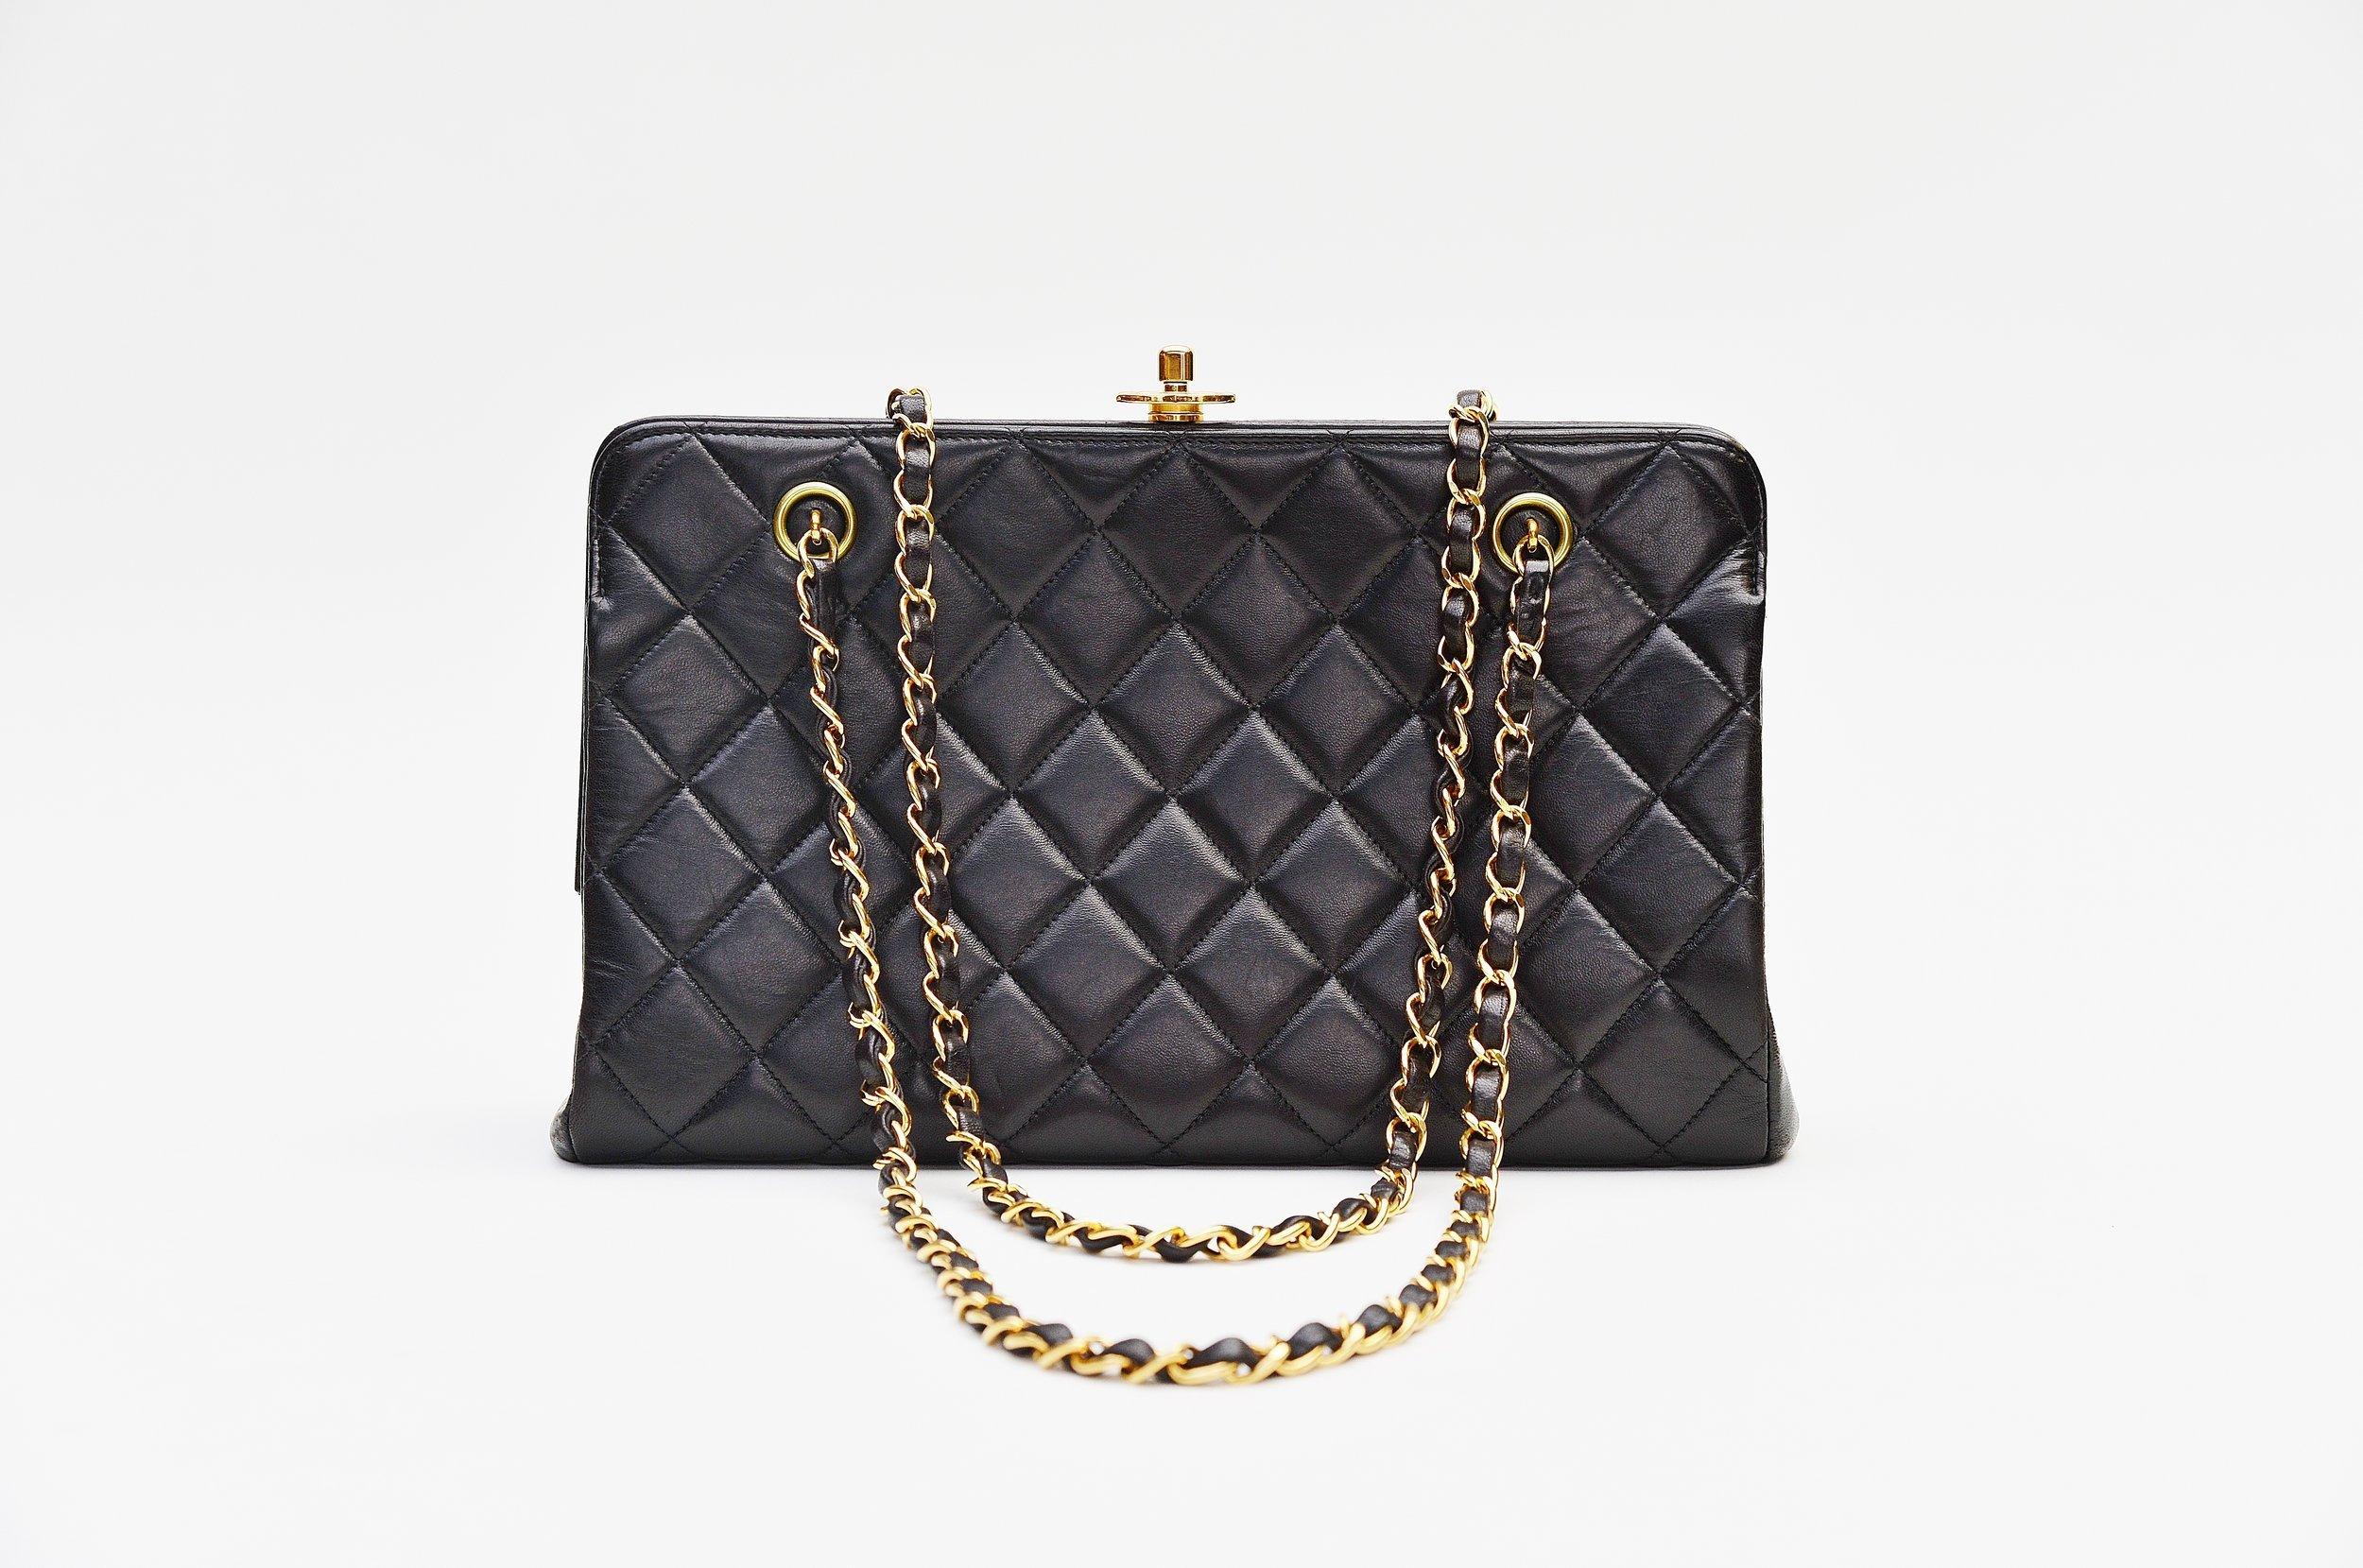 From the collection of Savineti we offer this Chanel Lambskin Shoulder Bag with CC top lock
-	Brand: Chanel 
-	Model: Vintage Shoulder bag with CC top lock 
-	Year: 1960s
-	Condition: Good 
-	Materials: Lambskin Leather, Gold Hardware (24k